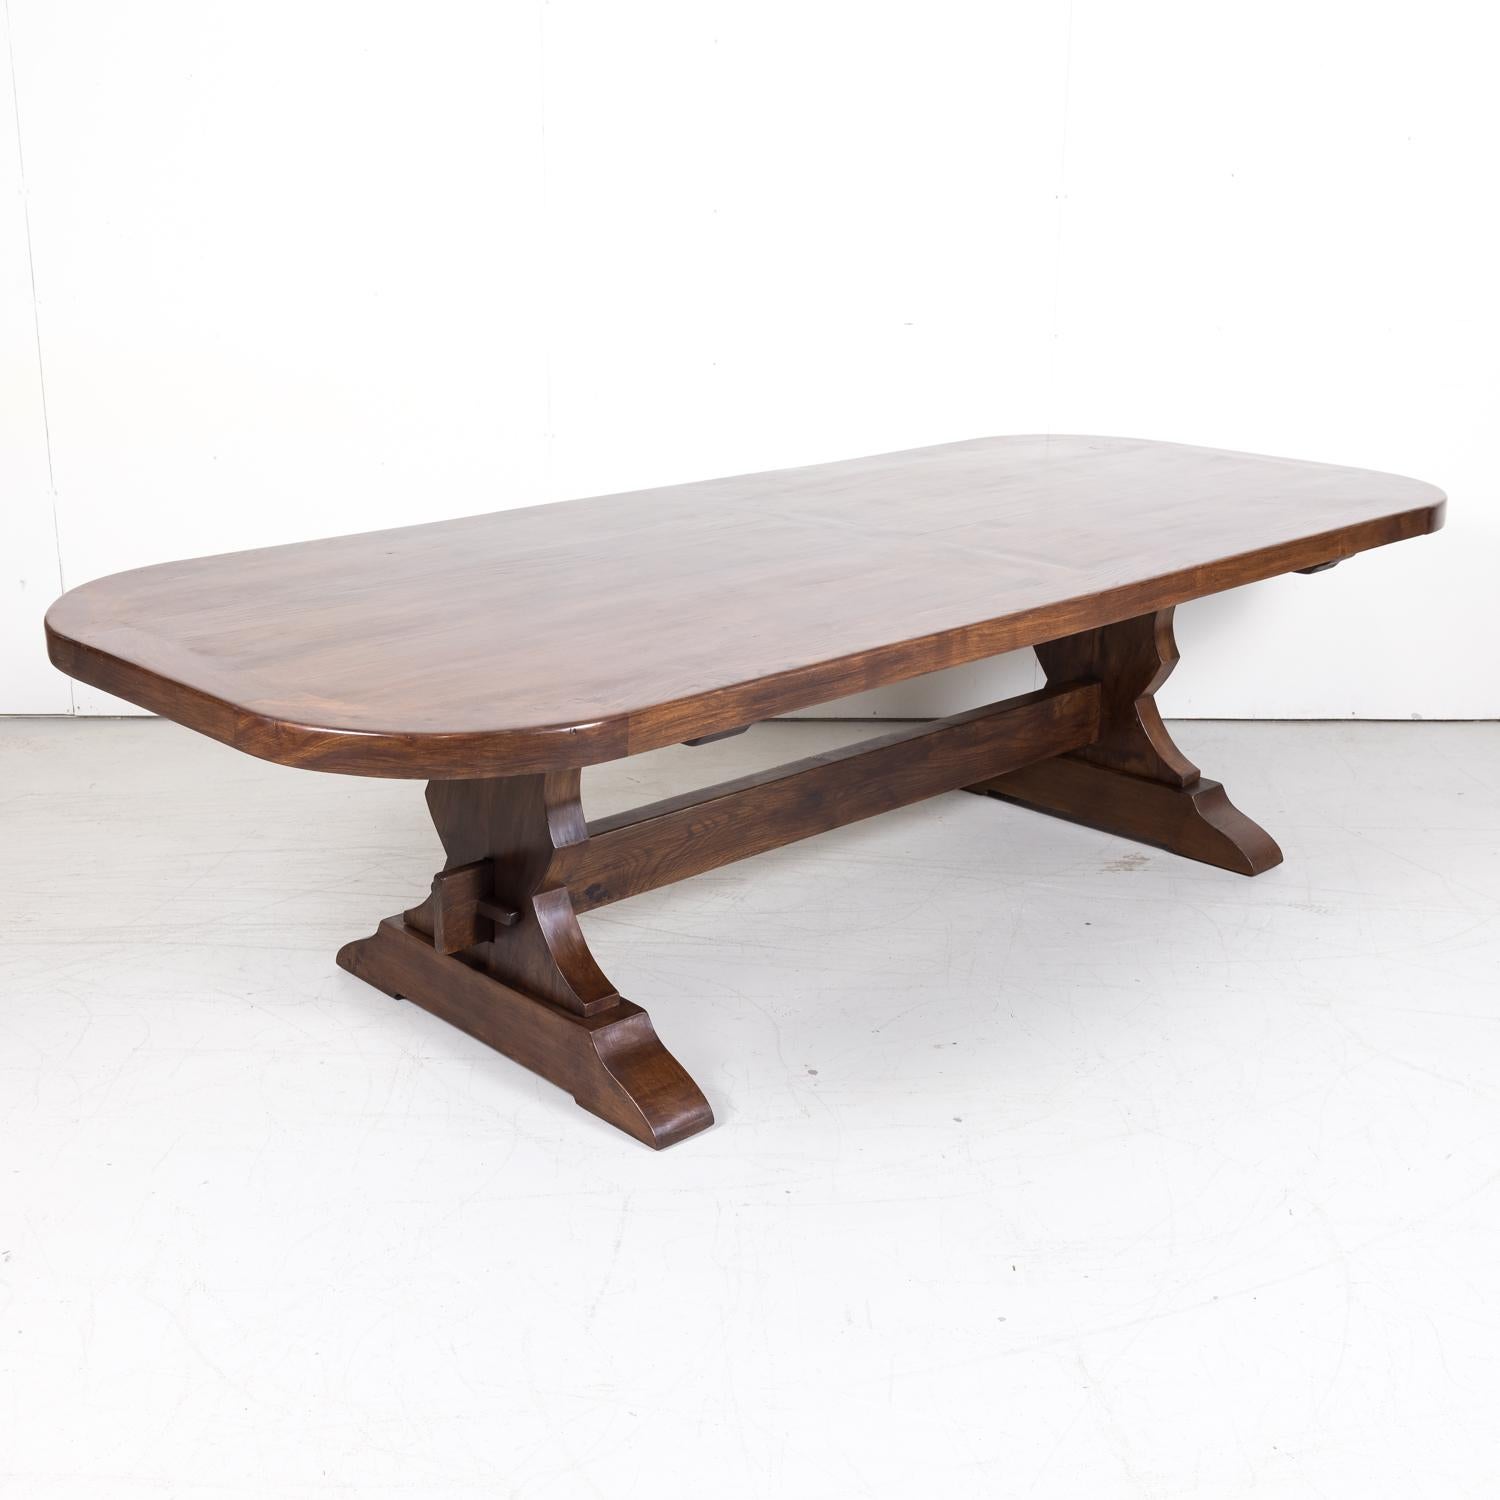 A late 19th century French trestle table handcrafted of solid chestnut in Provence, near Gordes, circa 1890s, having a thick inset plank top with a banded edge supported by two carved trestle bases joined by a center stretcher. This beautiful French